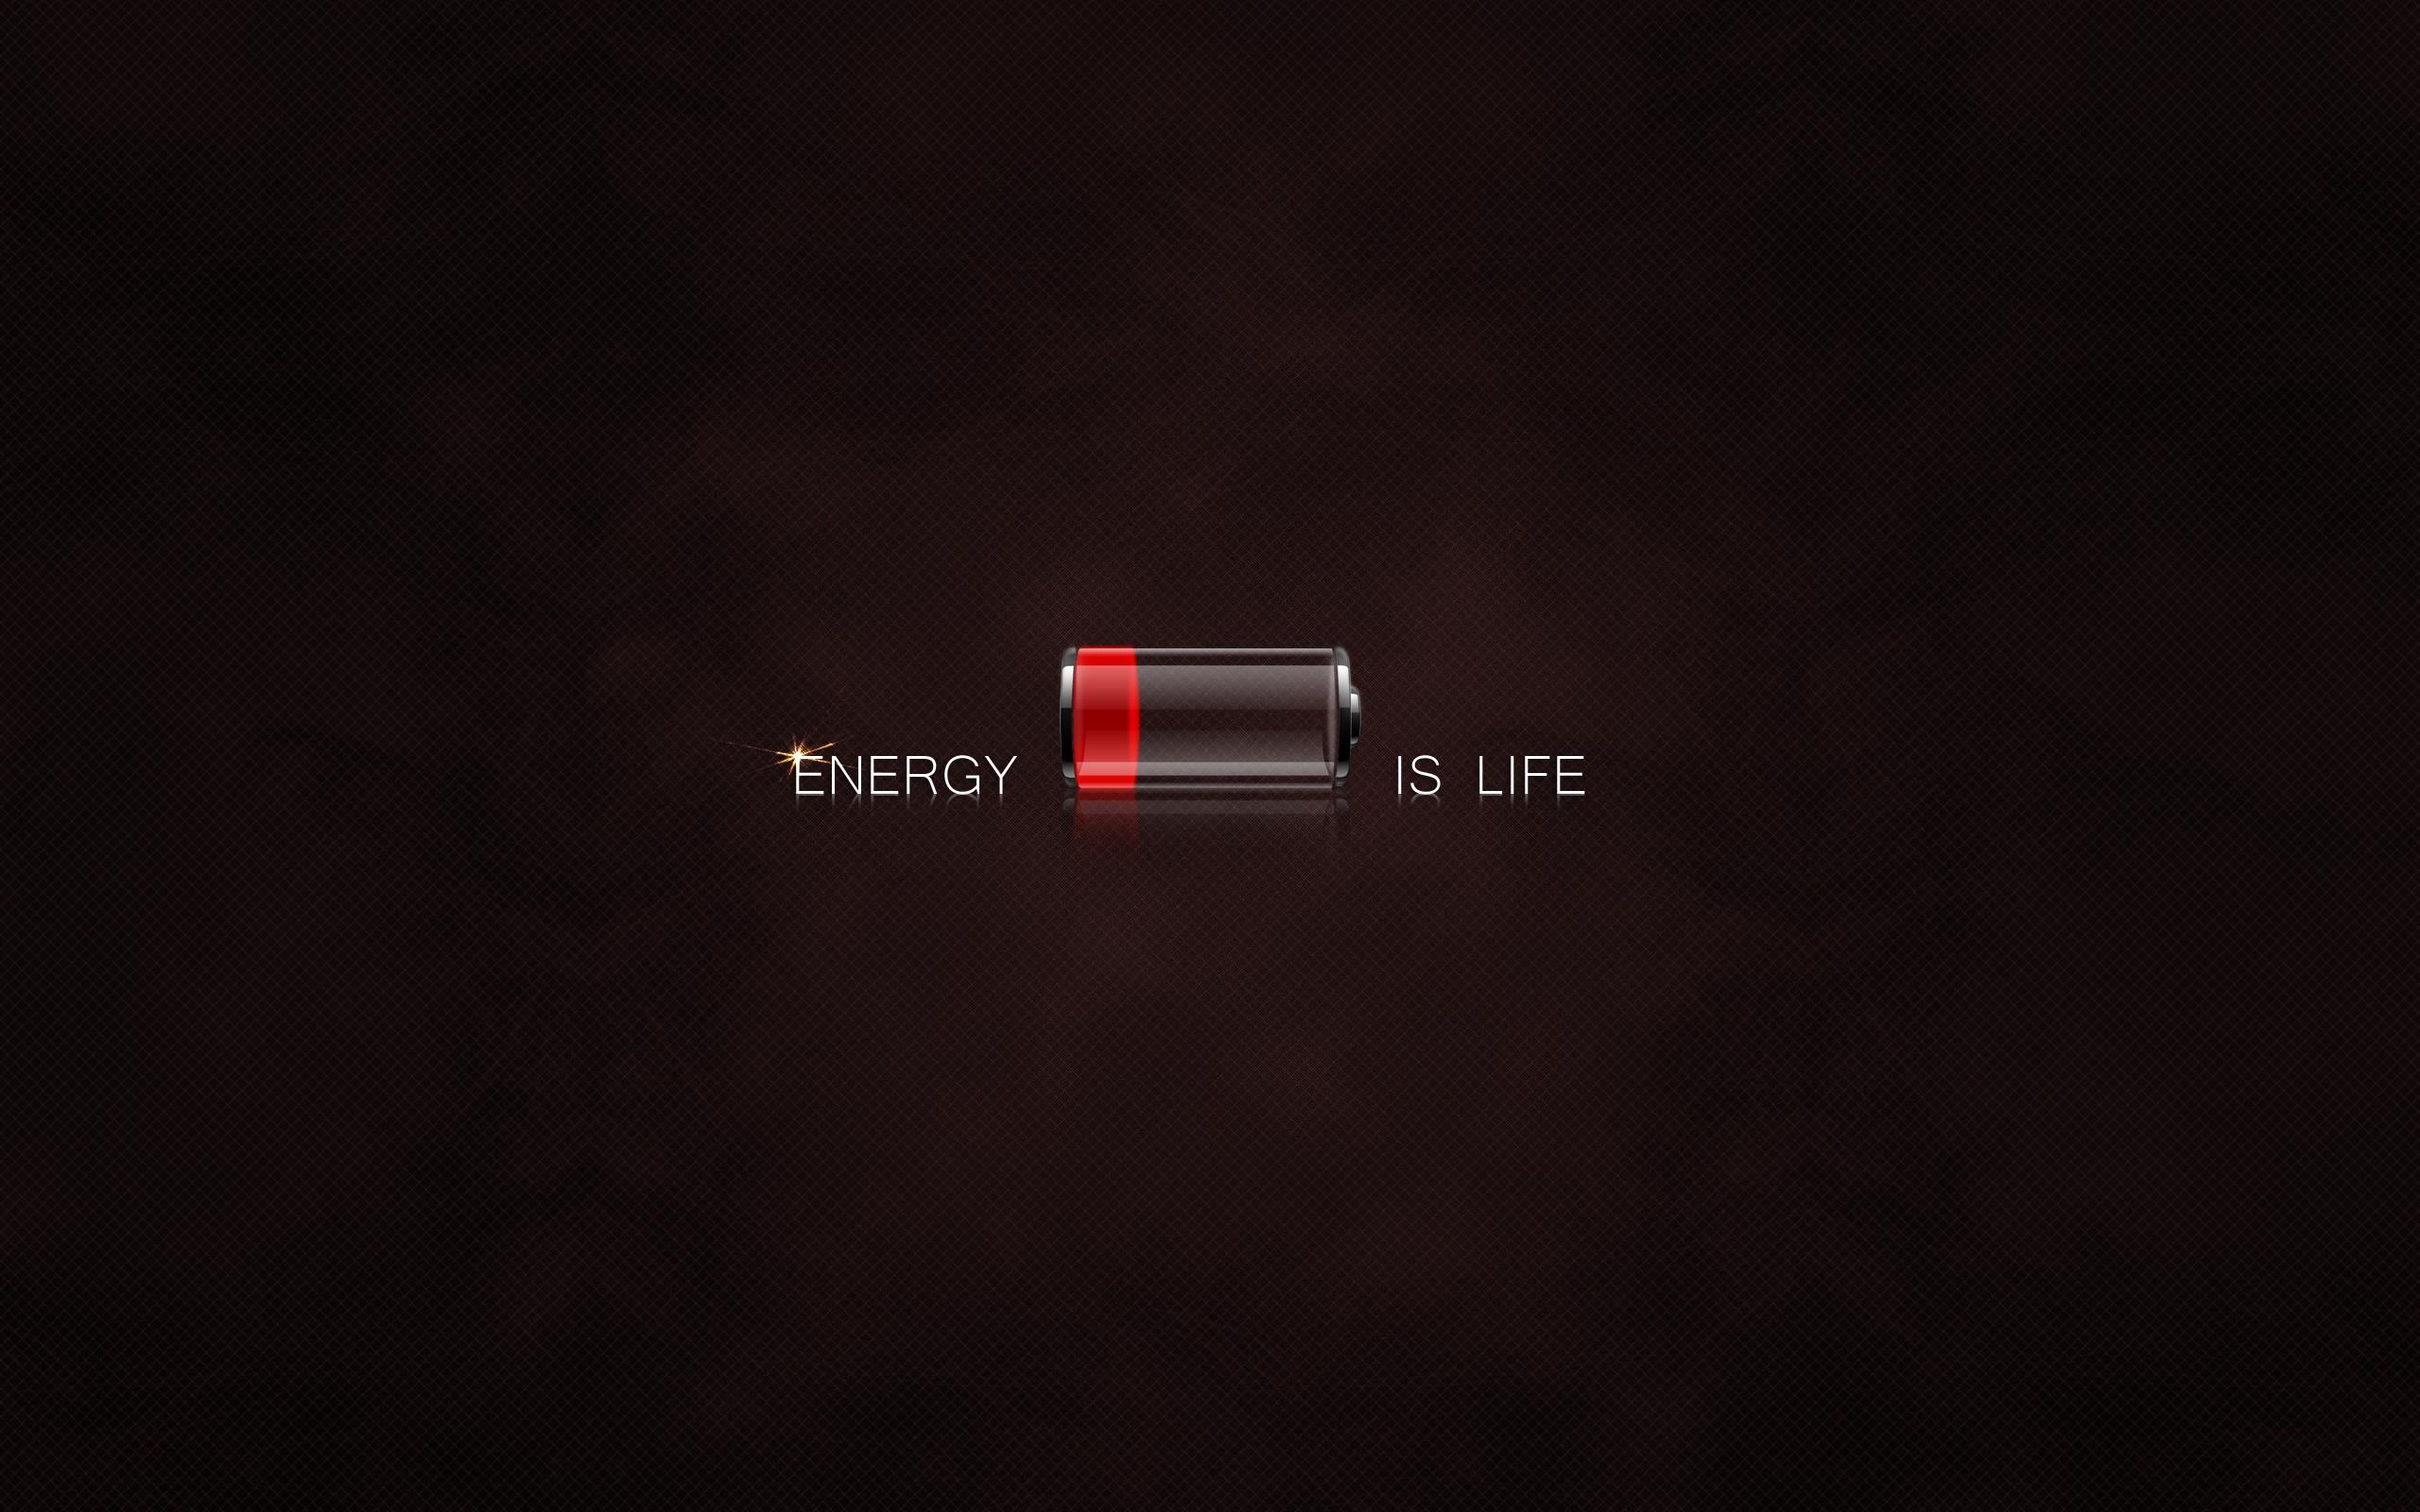 Download the Energy Is Life Wallpaper, Energy Is Life iPhone